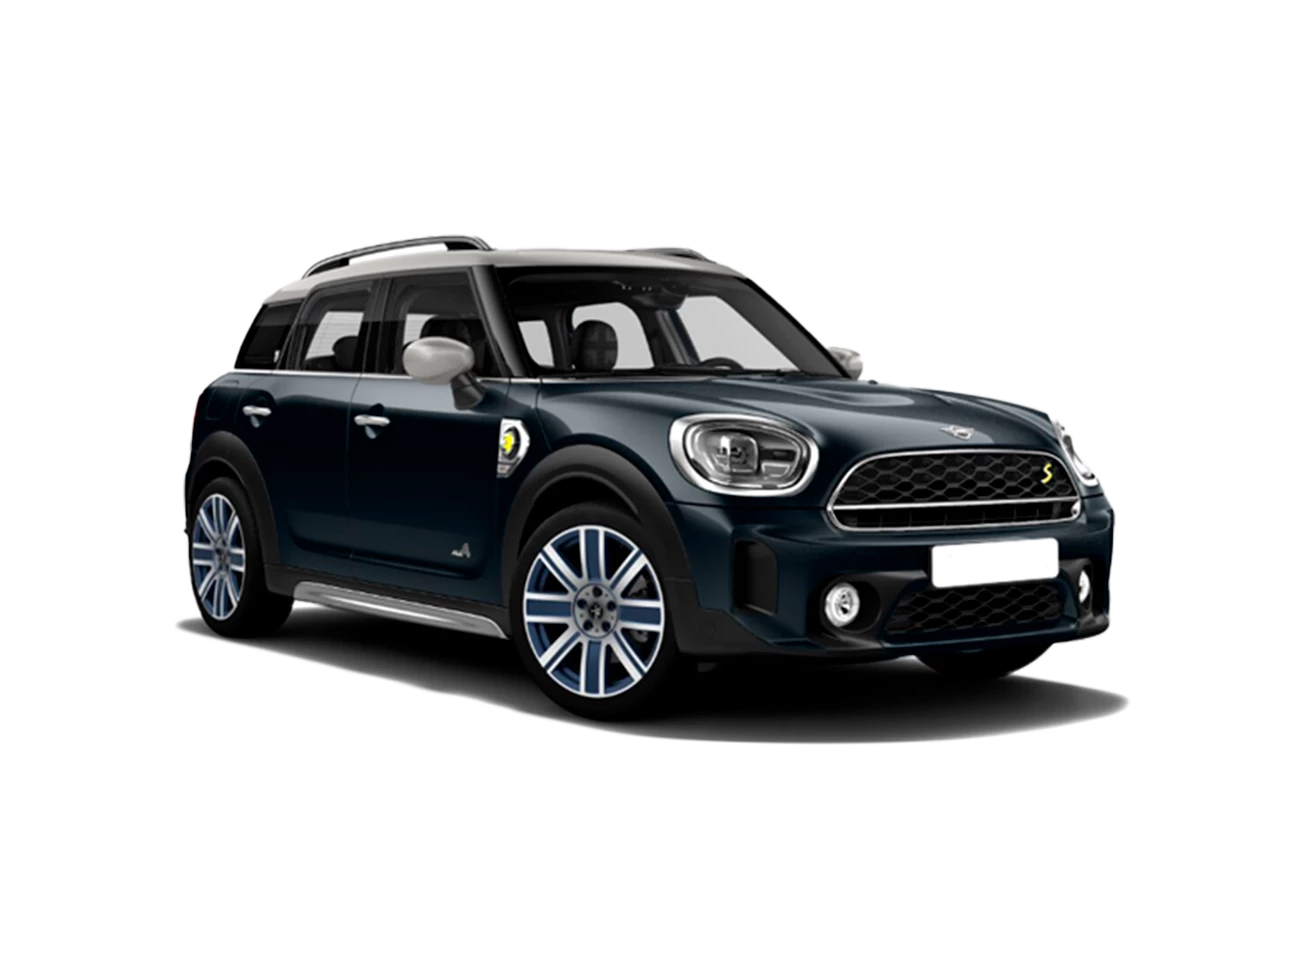 1.5 12V TWINPOWER TURBO HYBRID COOPER S E EXCLUSIVE ALL4 STEPTRONIC